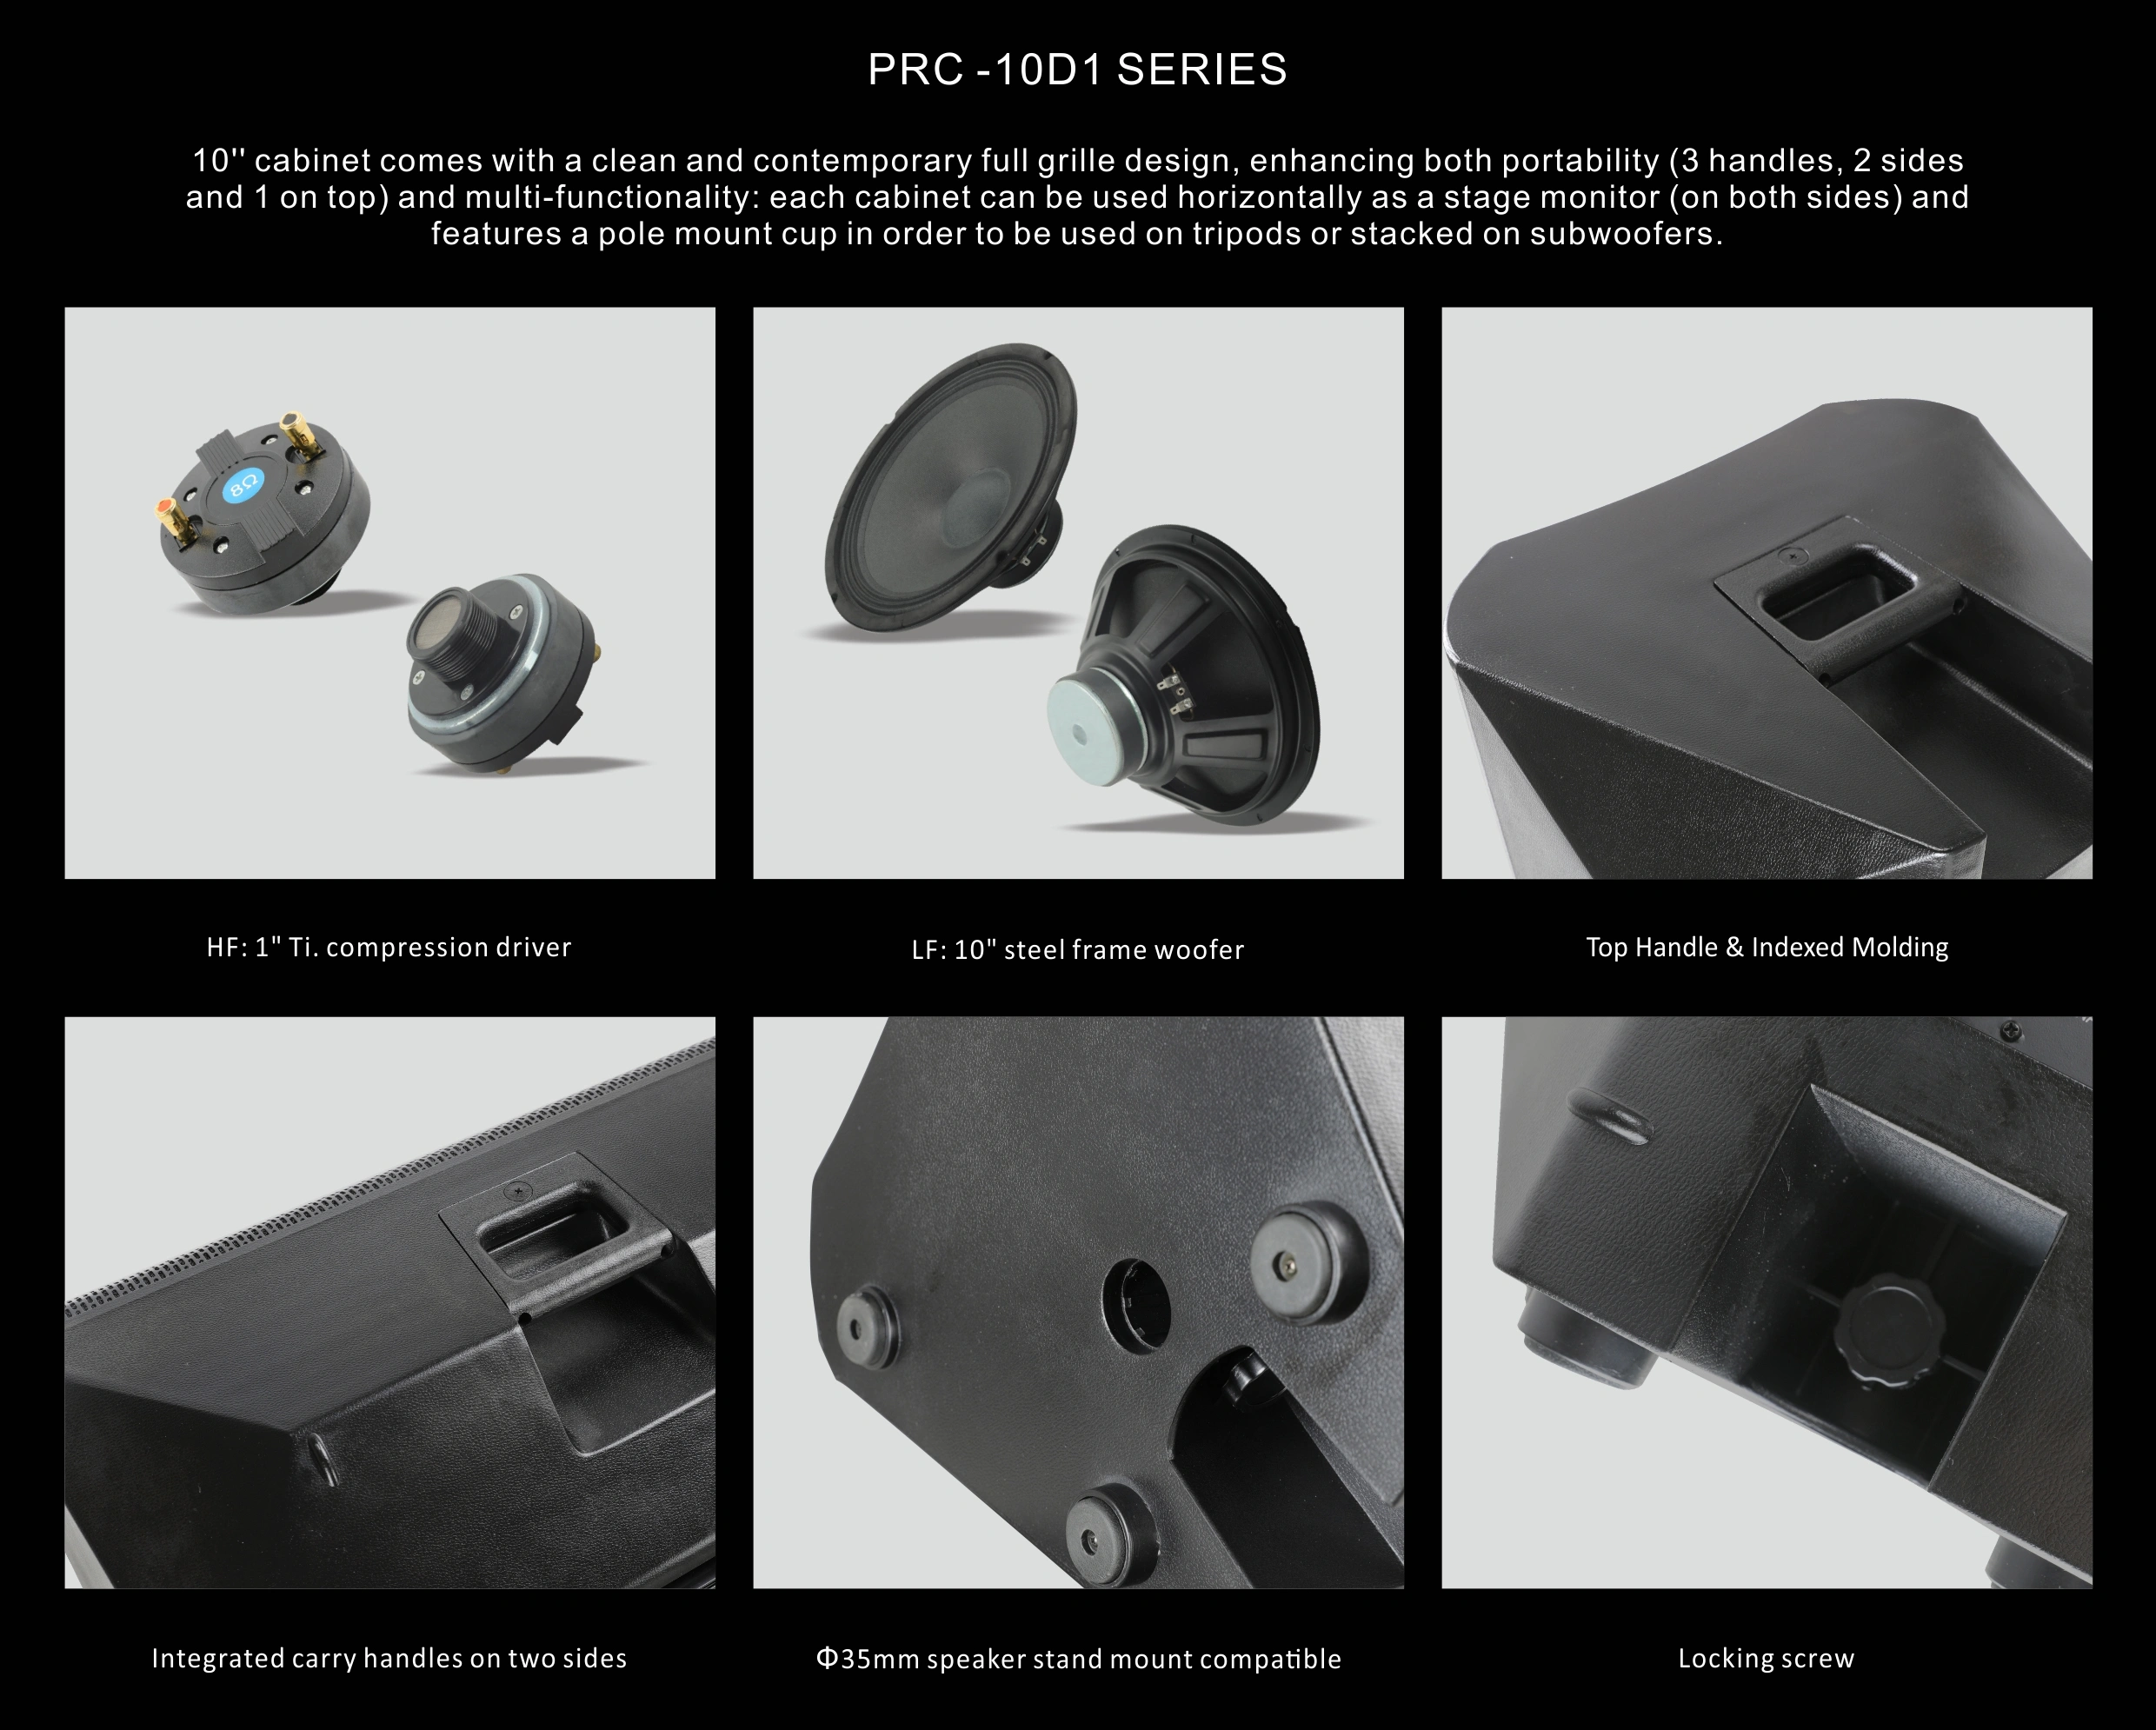 powered speakers, pa speakers, Portable PA System PY Series, ABS Molded PA Speakers